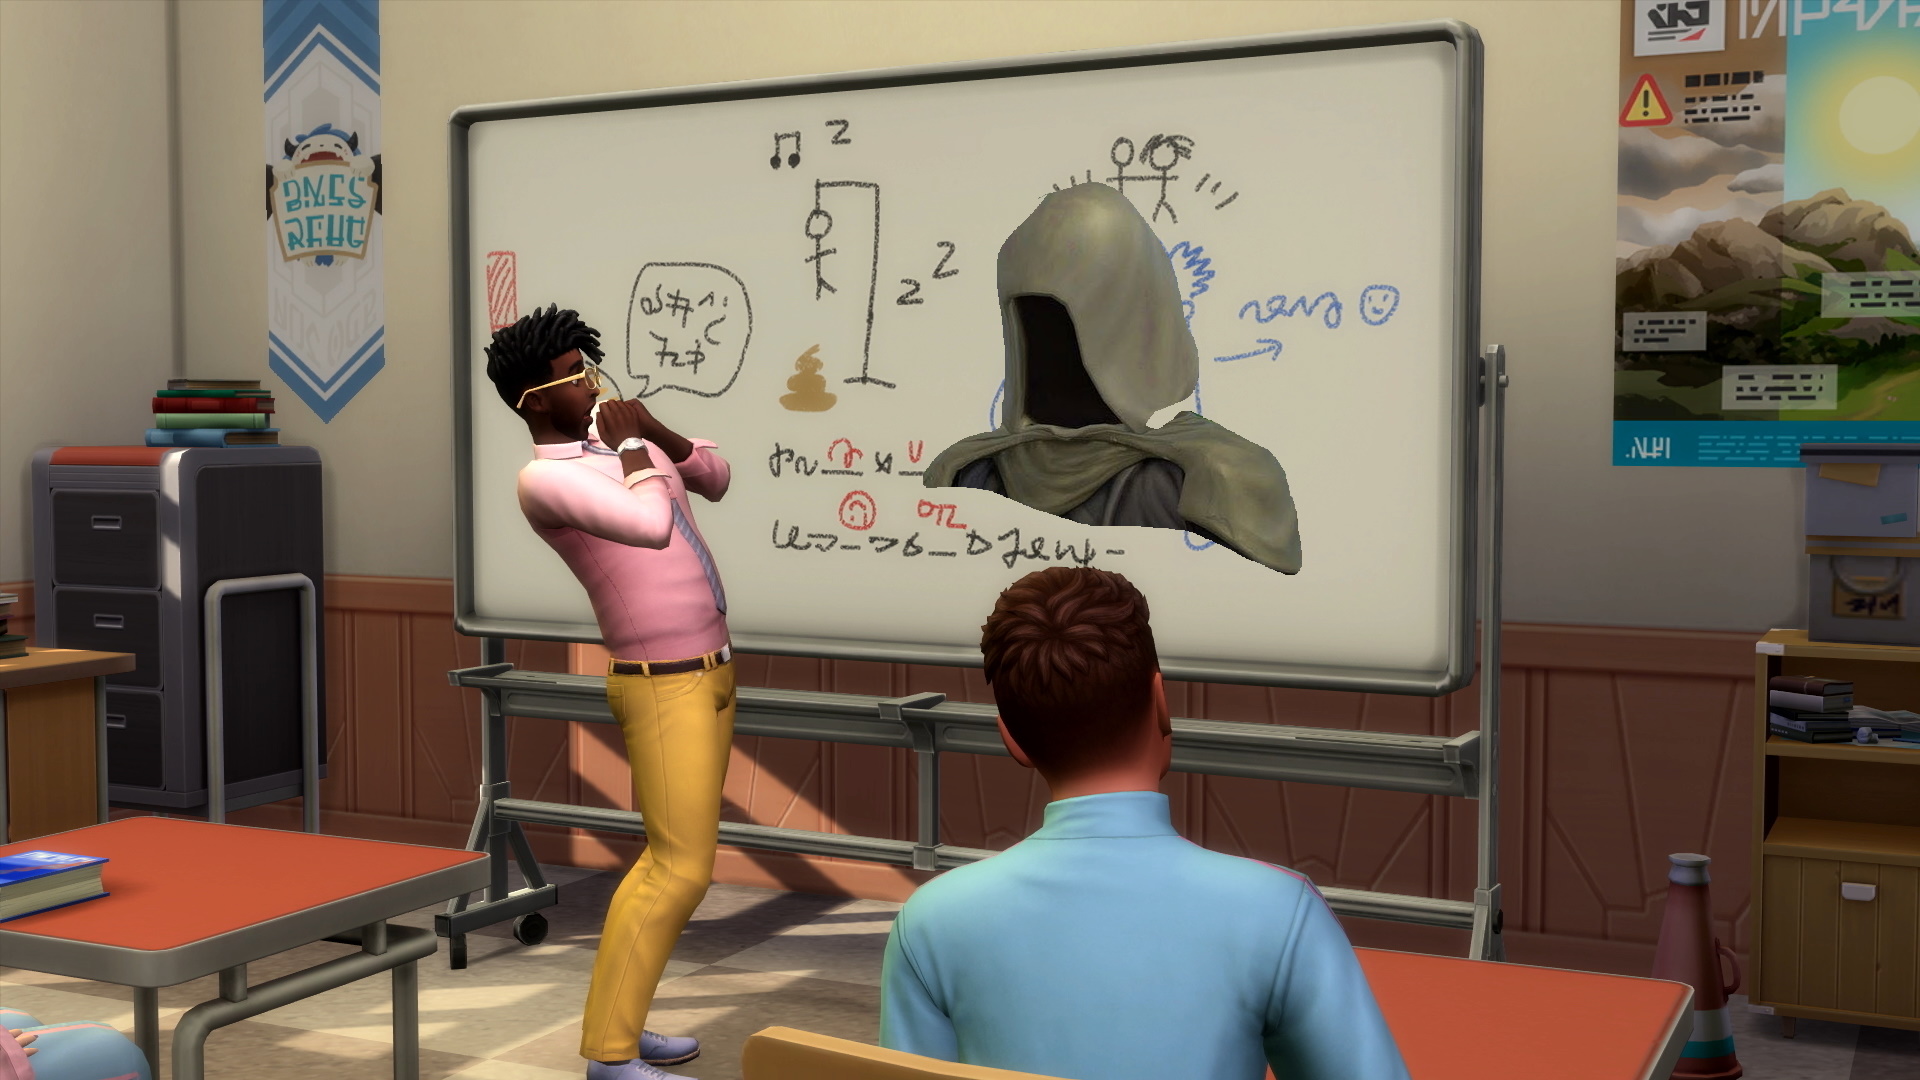 The Sims 4 High School Years quirk is making classes a bit grim